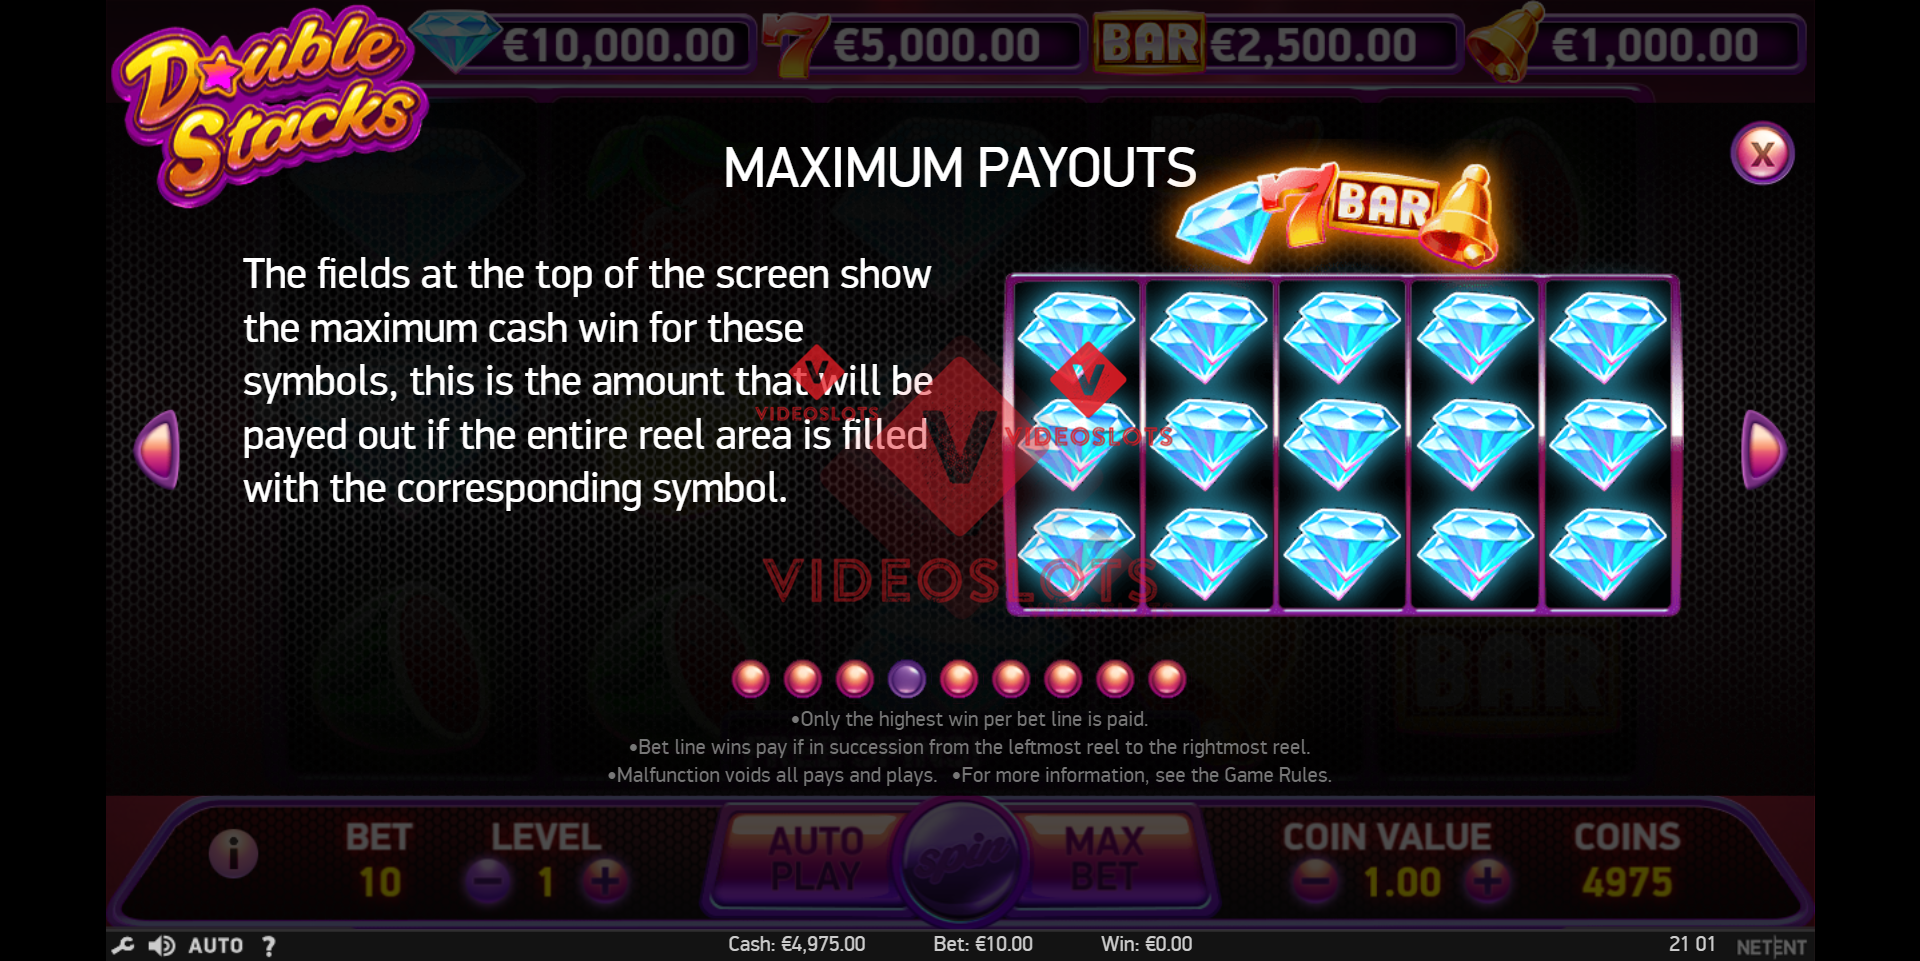 Pay Table for Double Stacks slot from NetEnt